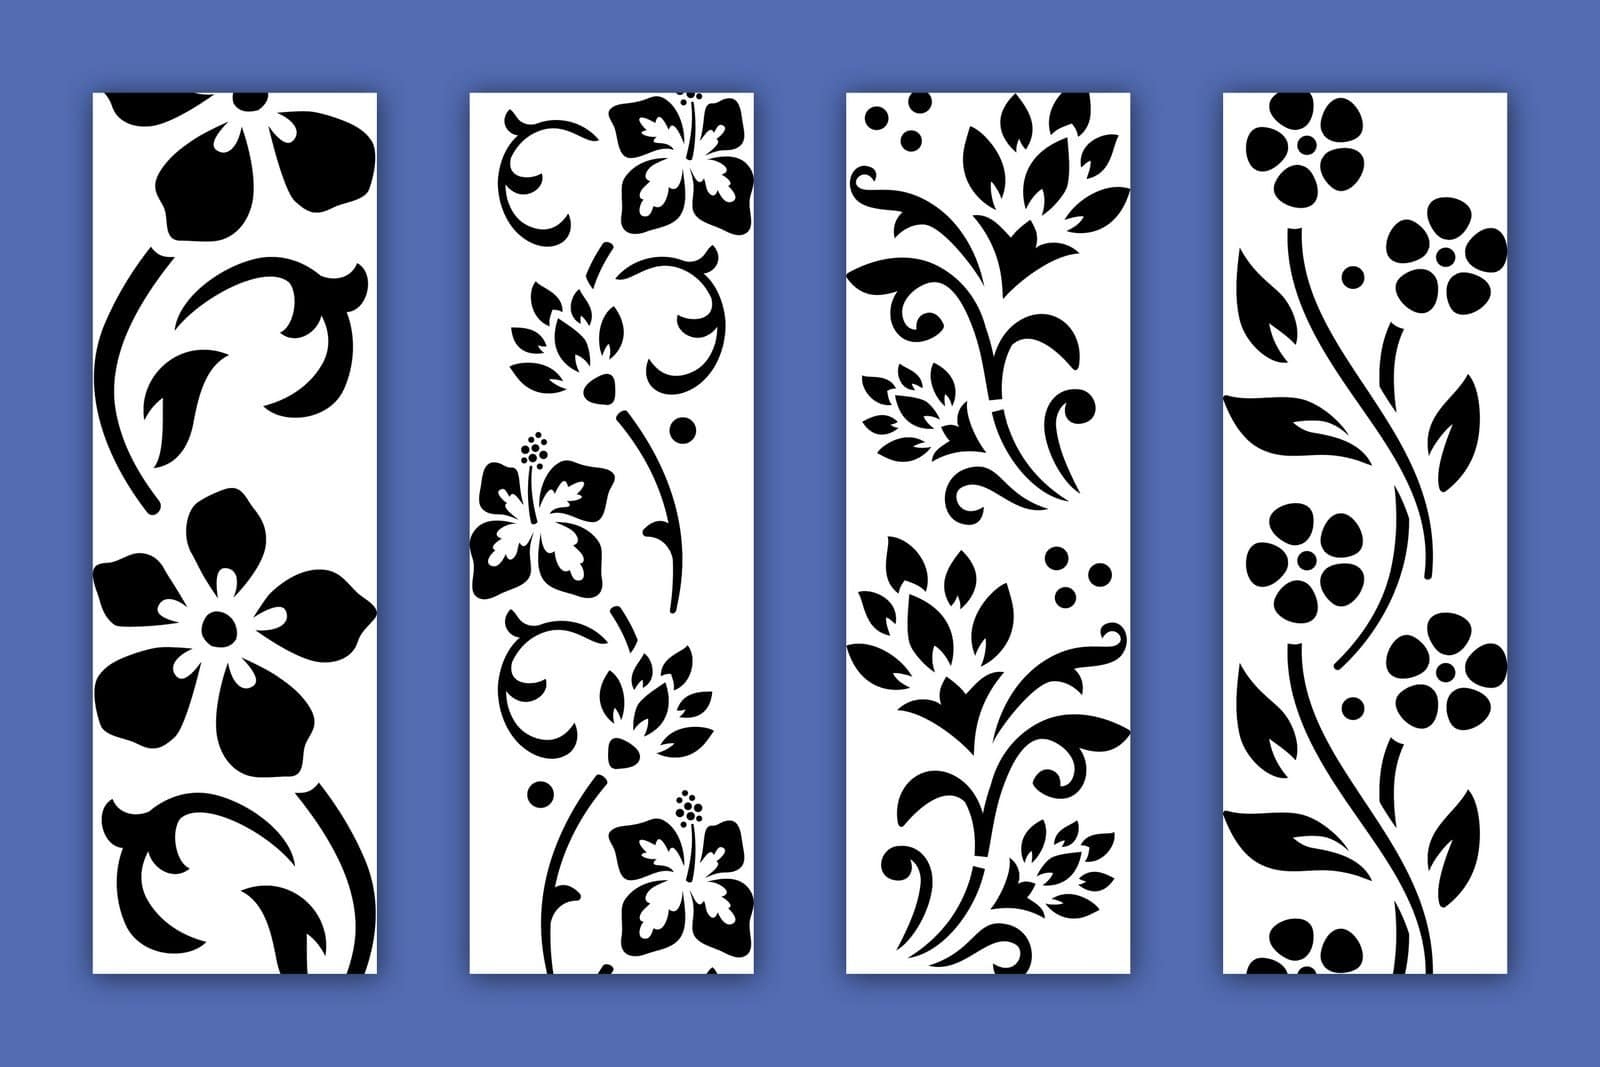 10 Free Flower Stencil Designs For Printing &amp; Craft Projects, At throughout Free Printable Stencil Patterns